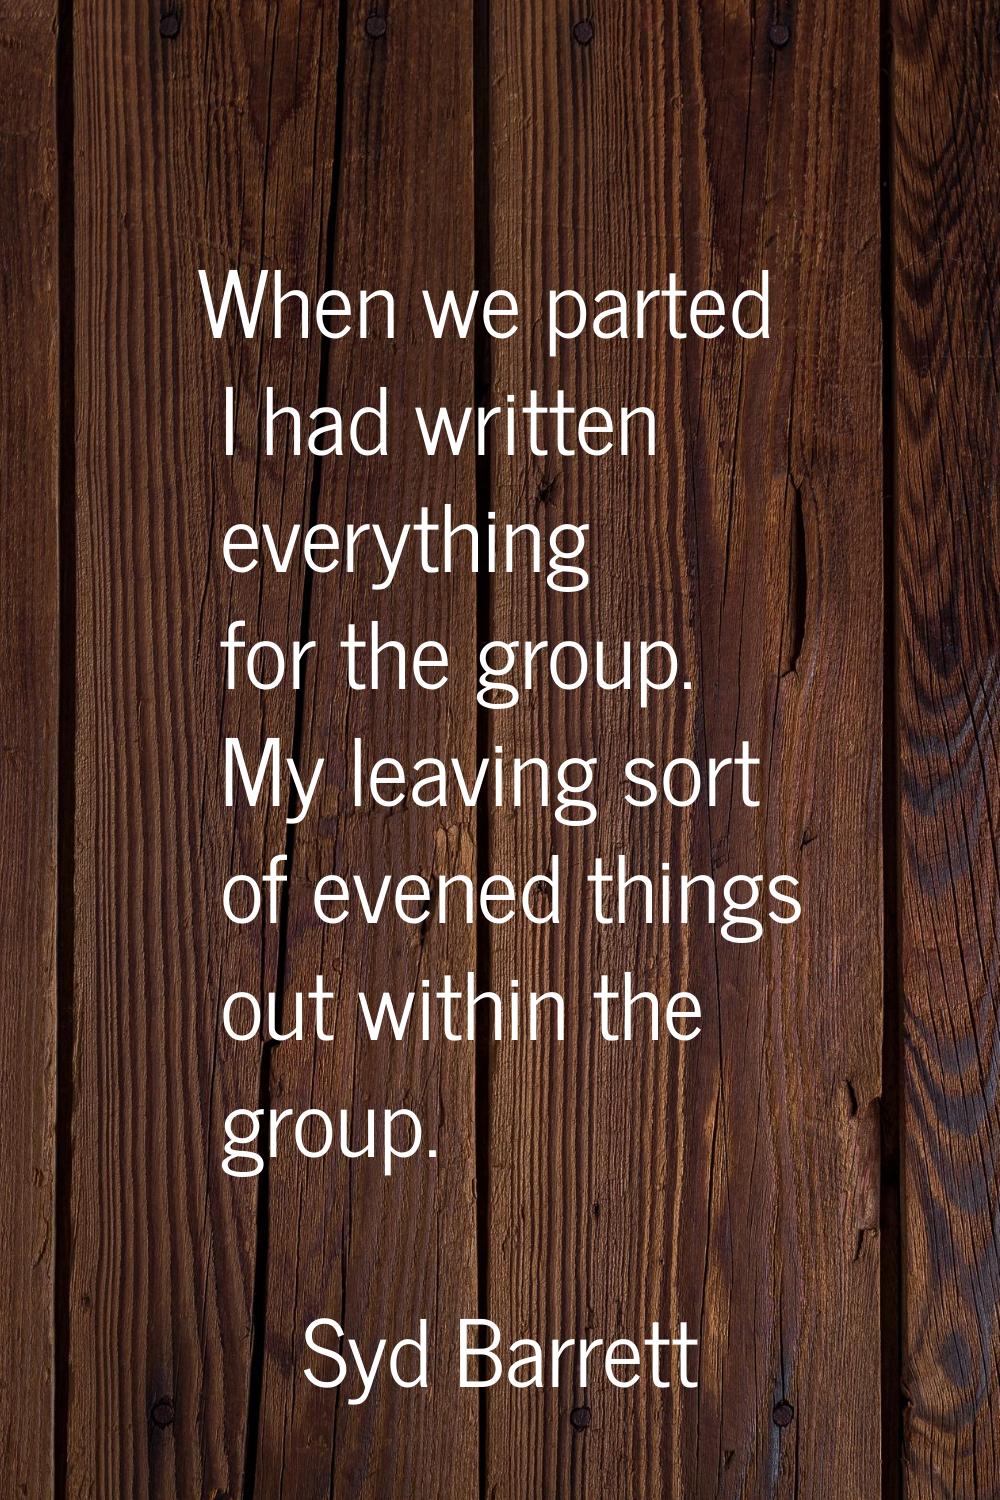 When we parted I had written everything for the group. My leaving sort of evened things out within 